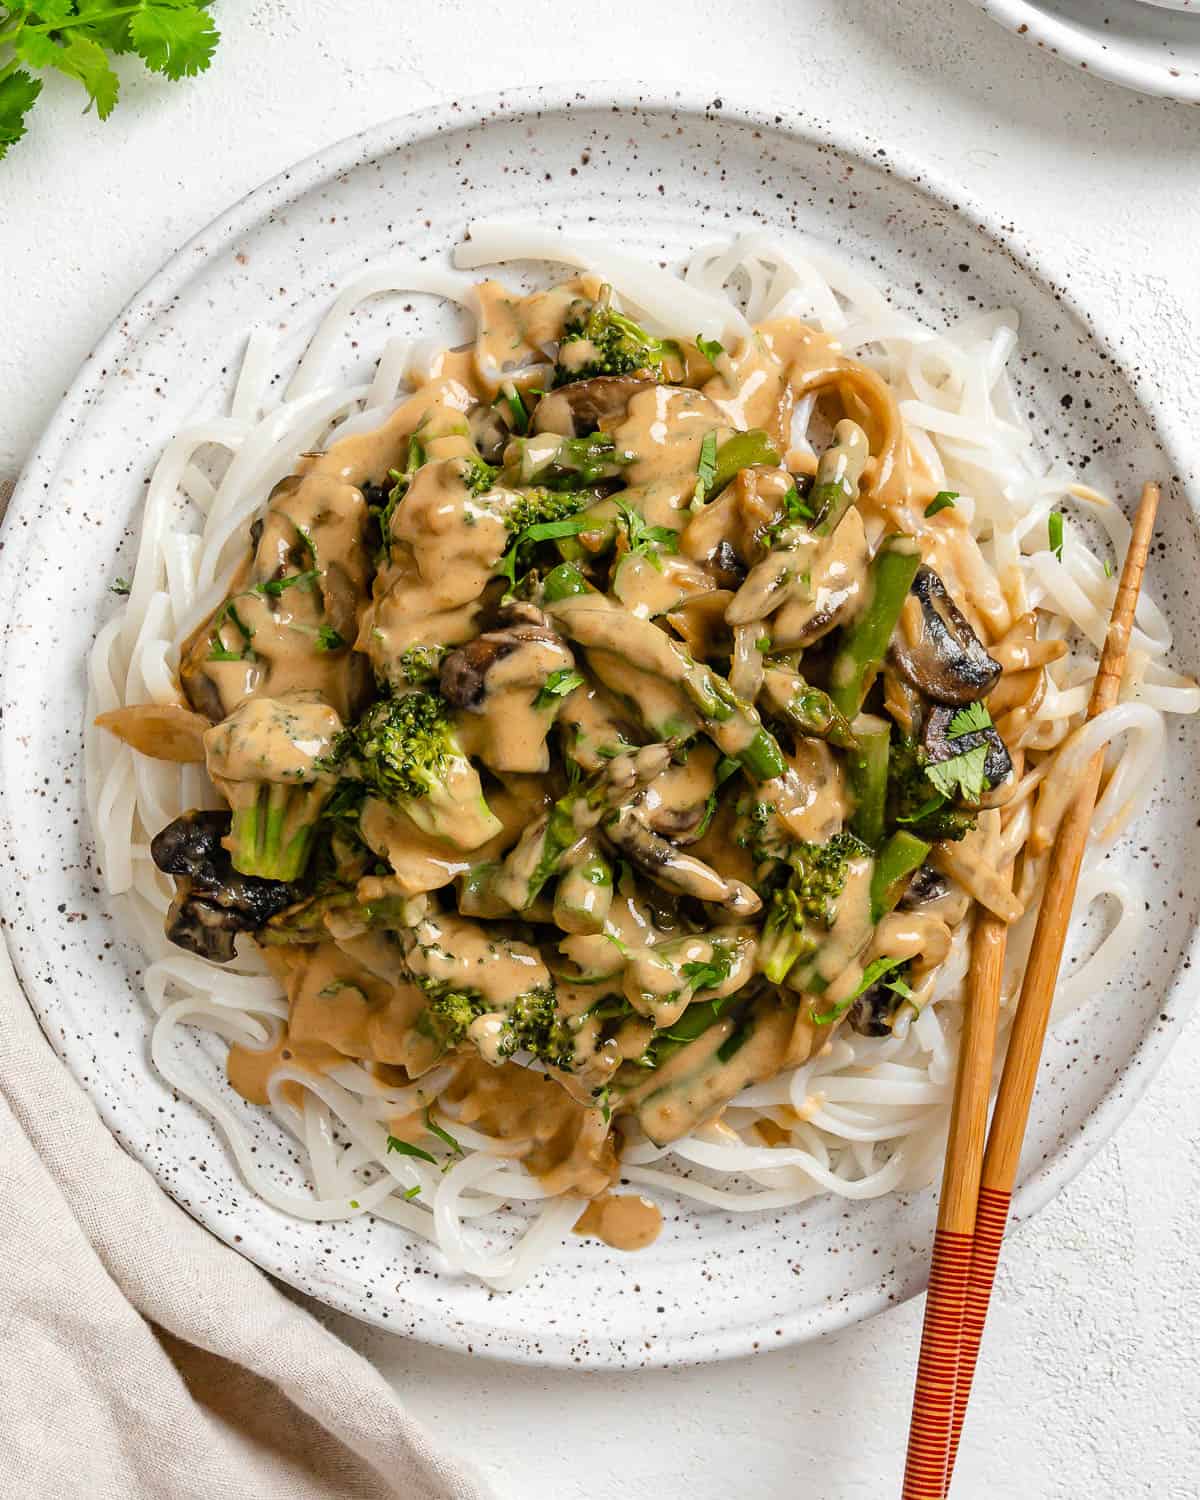 completed Creamy Rice Noodle Stir Fry plated against a white surface